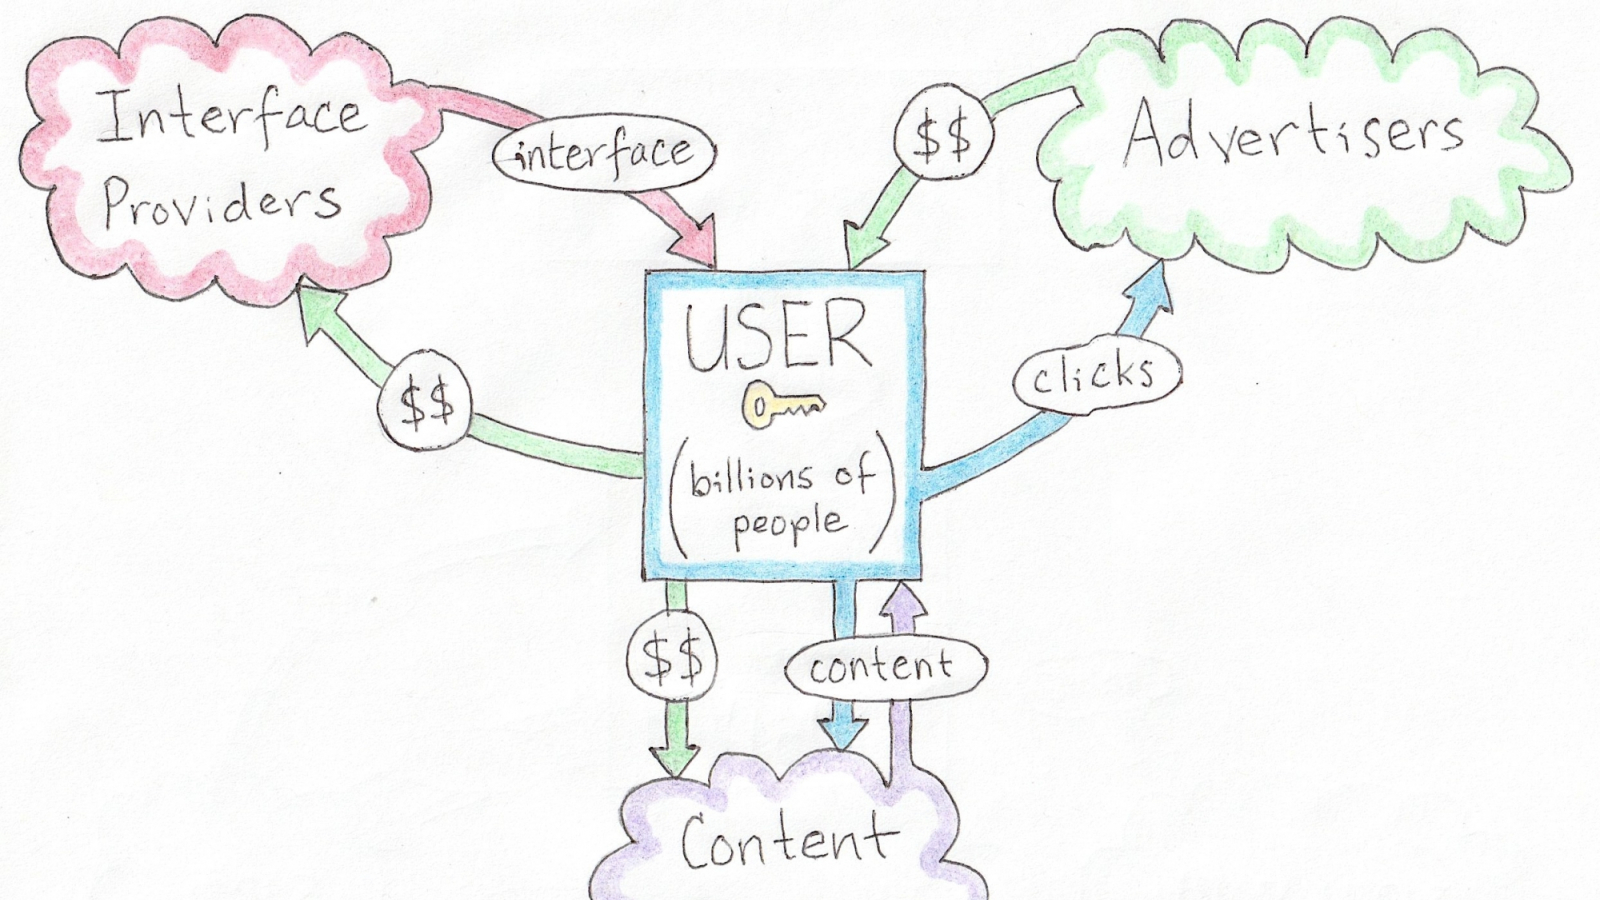 User-centric model, core element of Ulbricht DSP